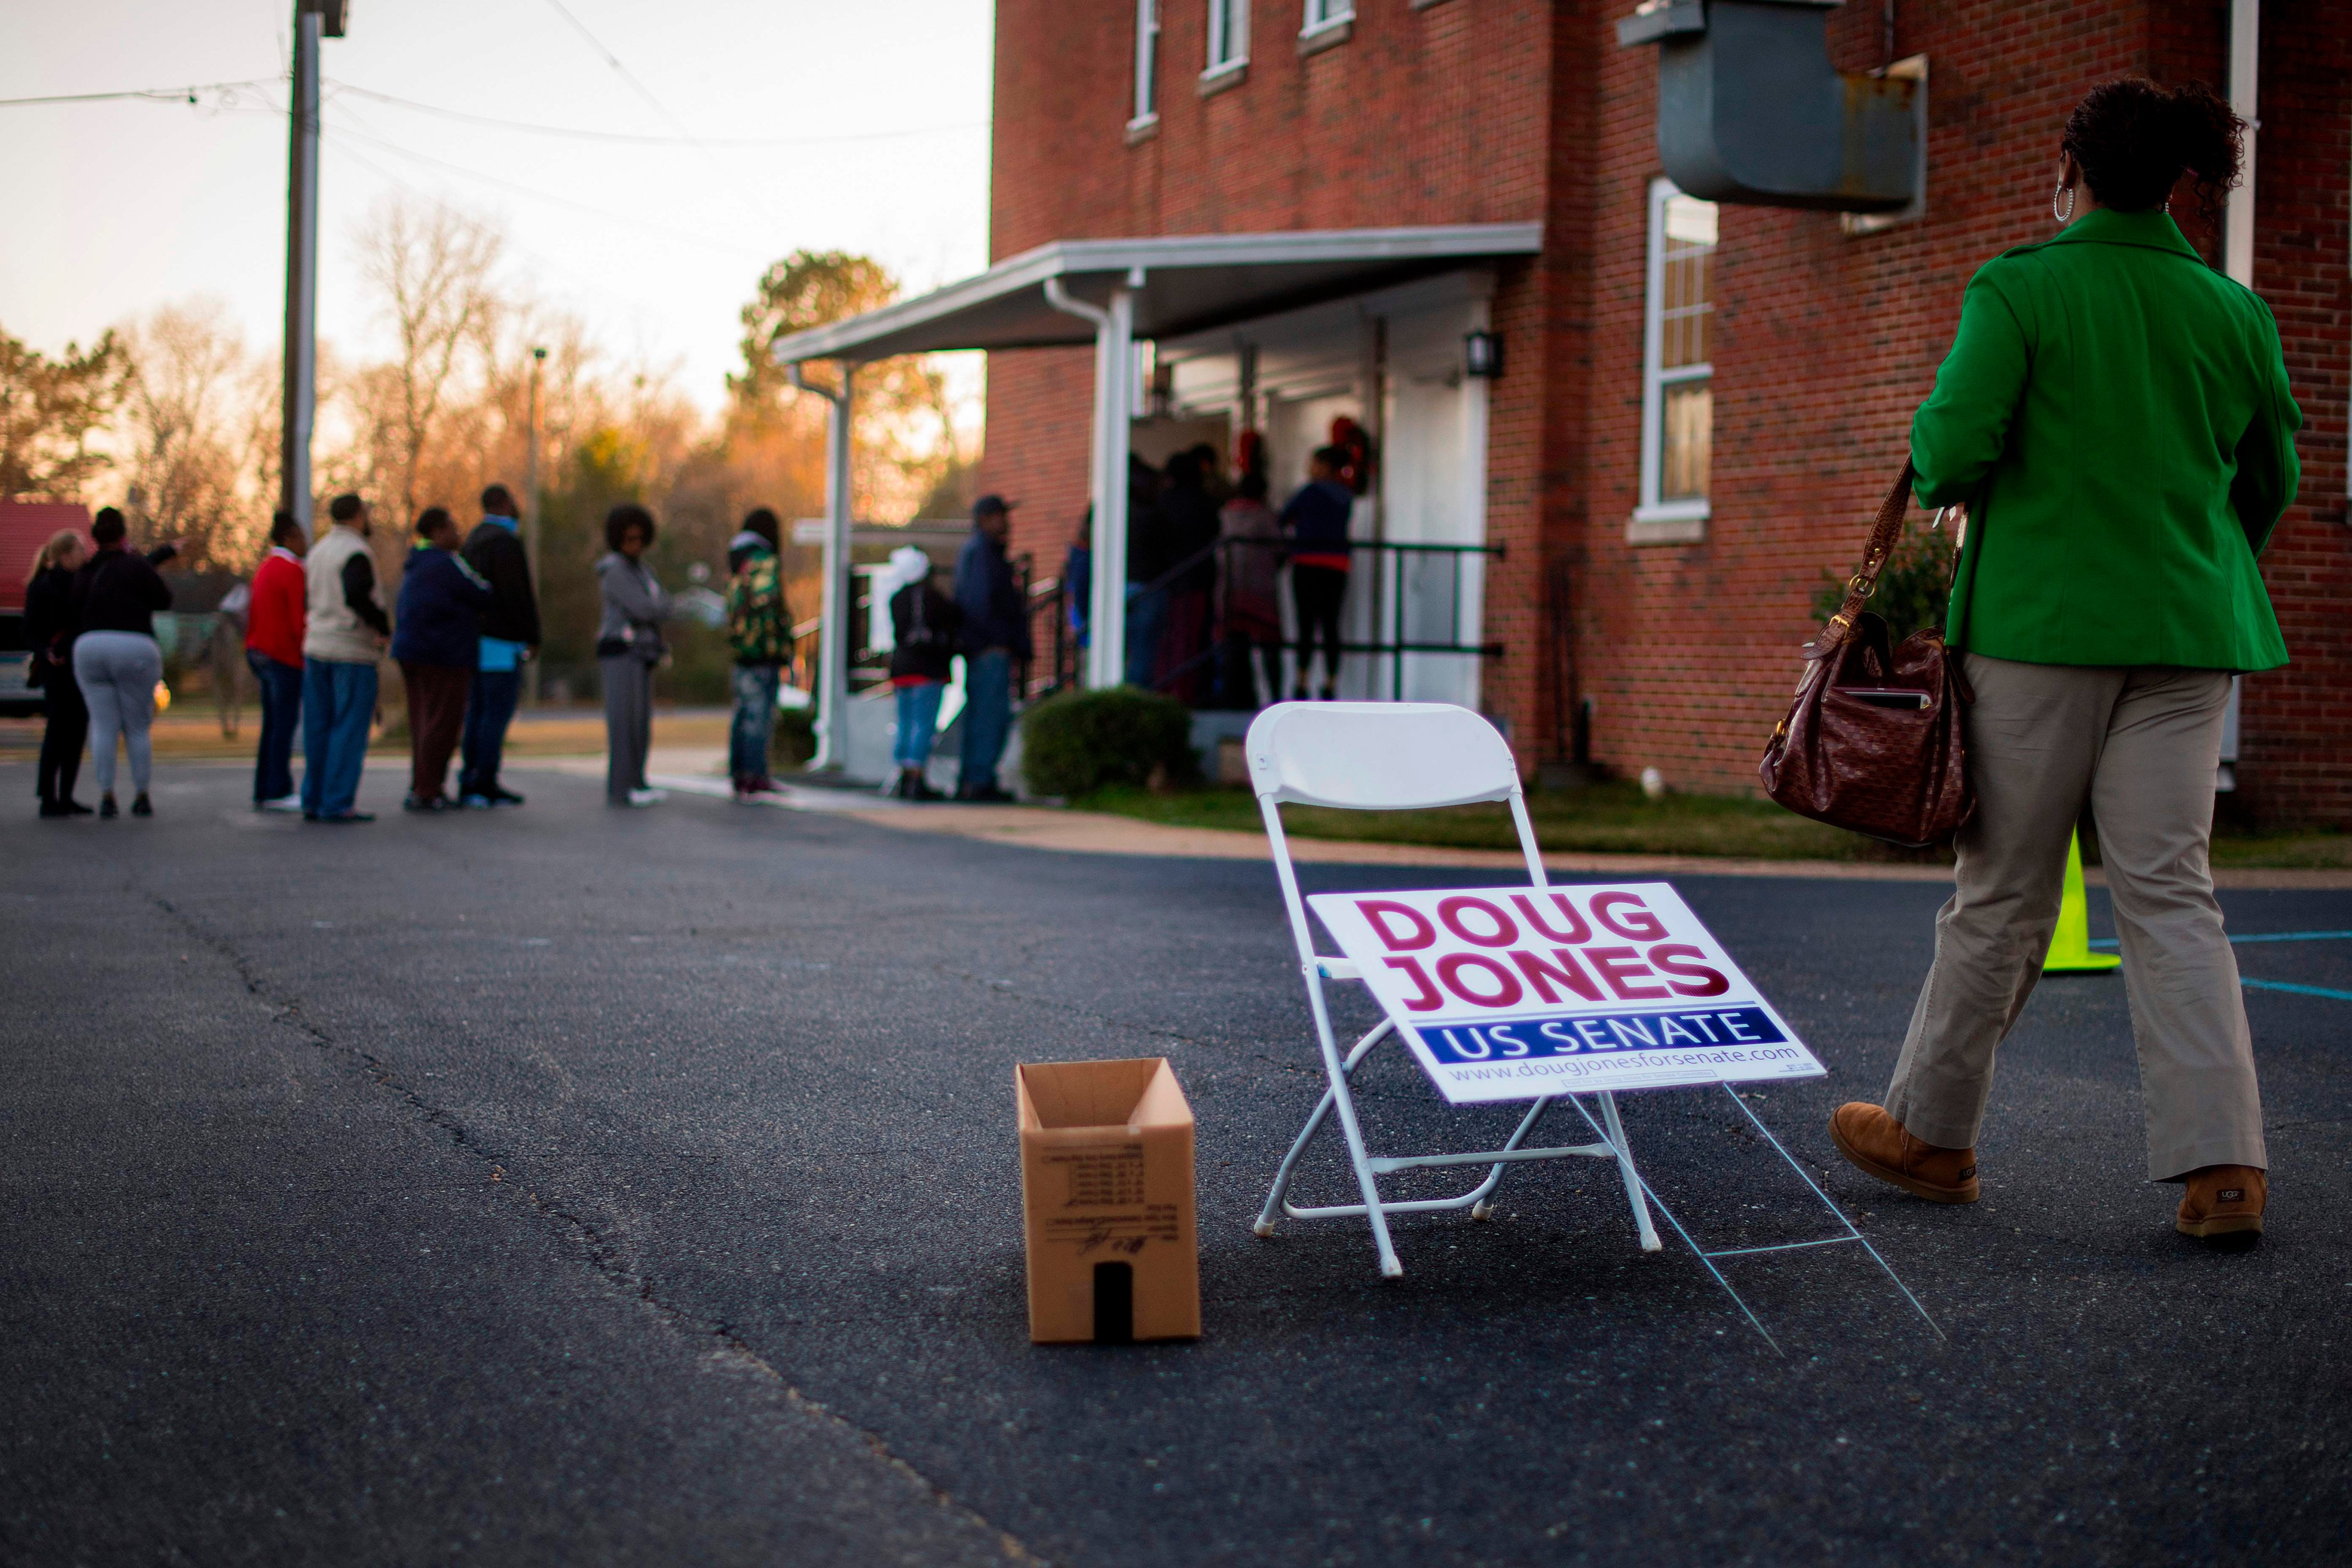 A woman passes a placard for Democratic Senatorial candidate Doug Jones as she walks over to get in the long line to vote at Beulah Baptist Church polling station in Montgomery, Alabama, on December 12, 2017. (JIM WATSON&mdash;AFP/Getty Images)